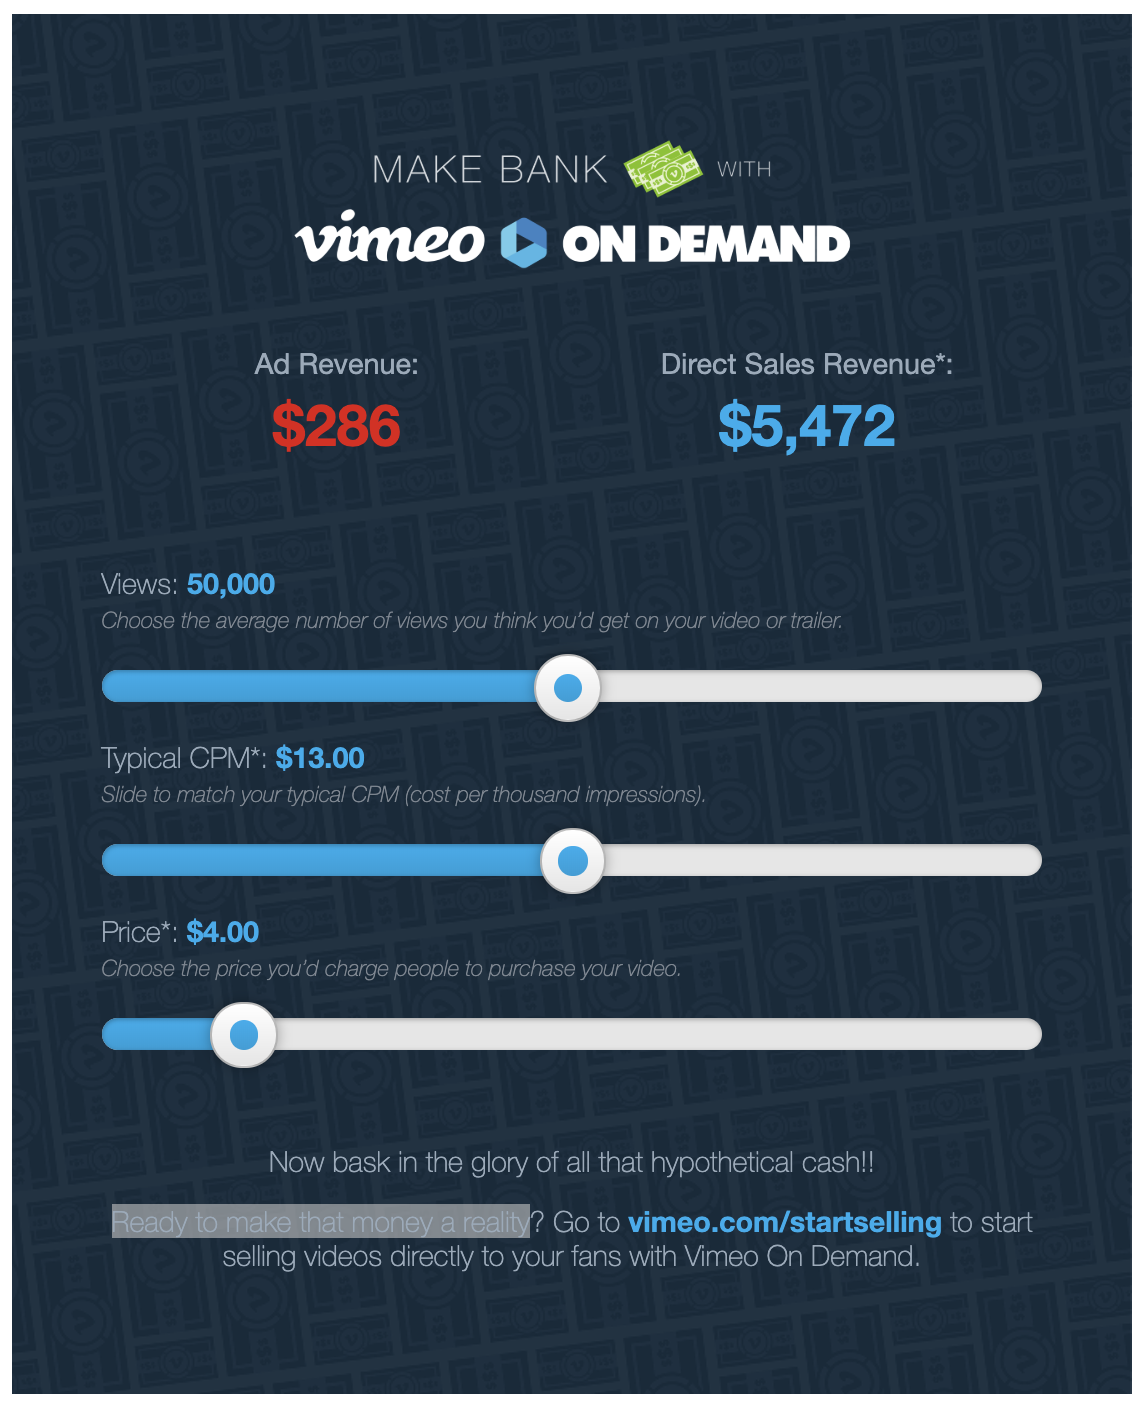 Earn more without ads: the math behind Vimeo On Demand